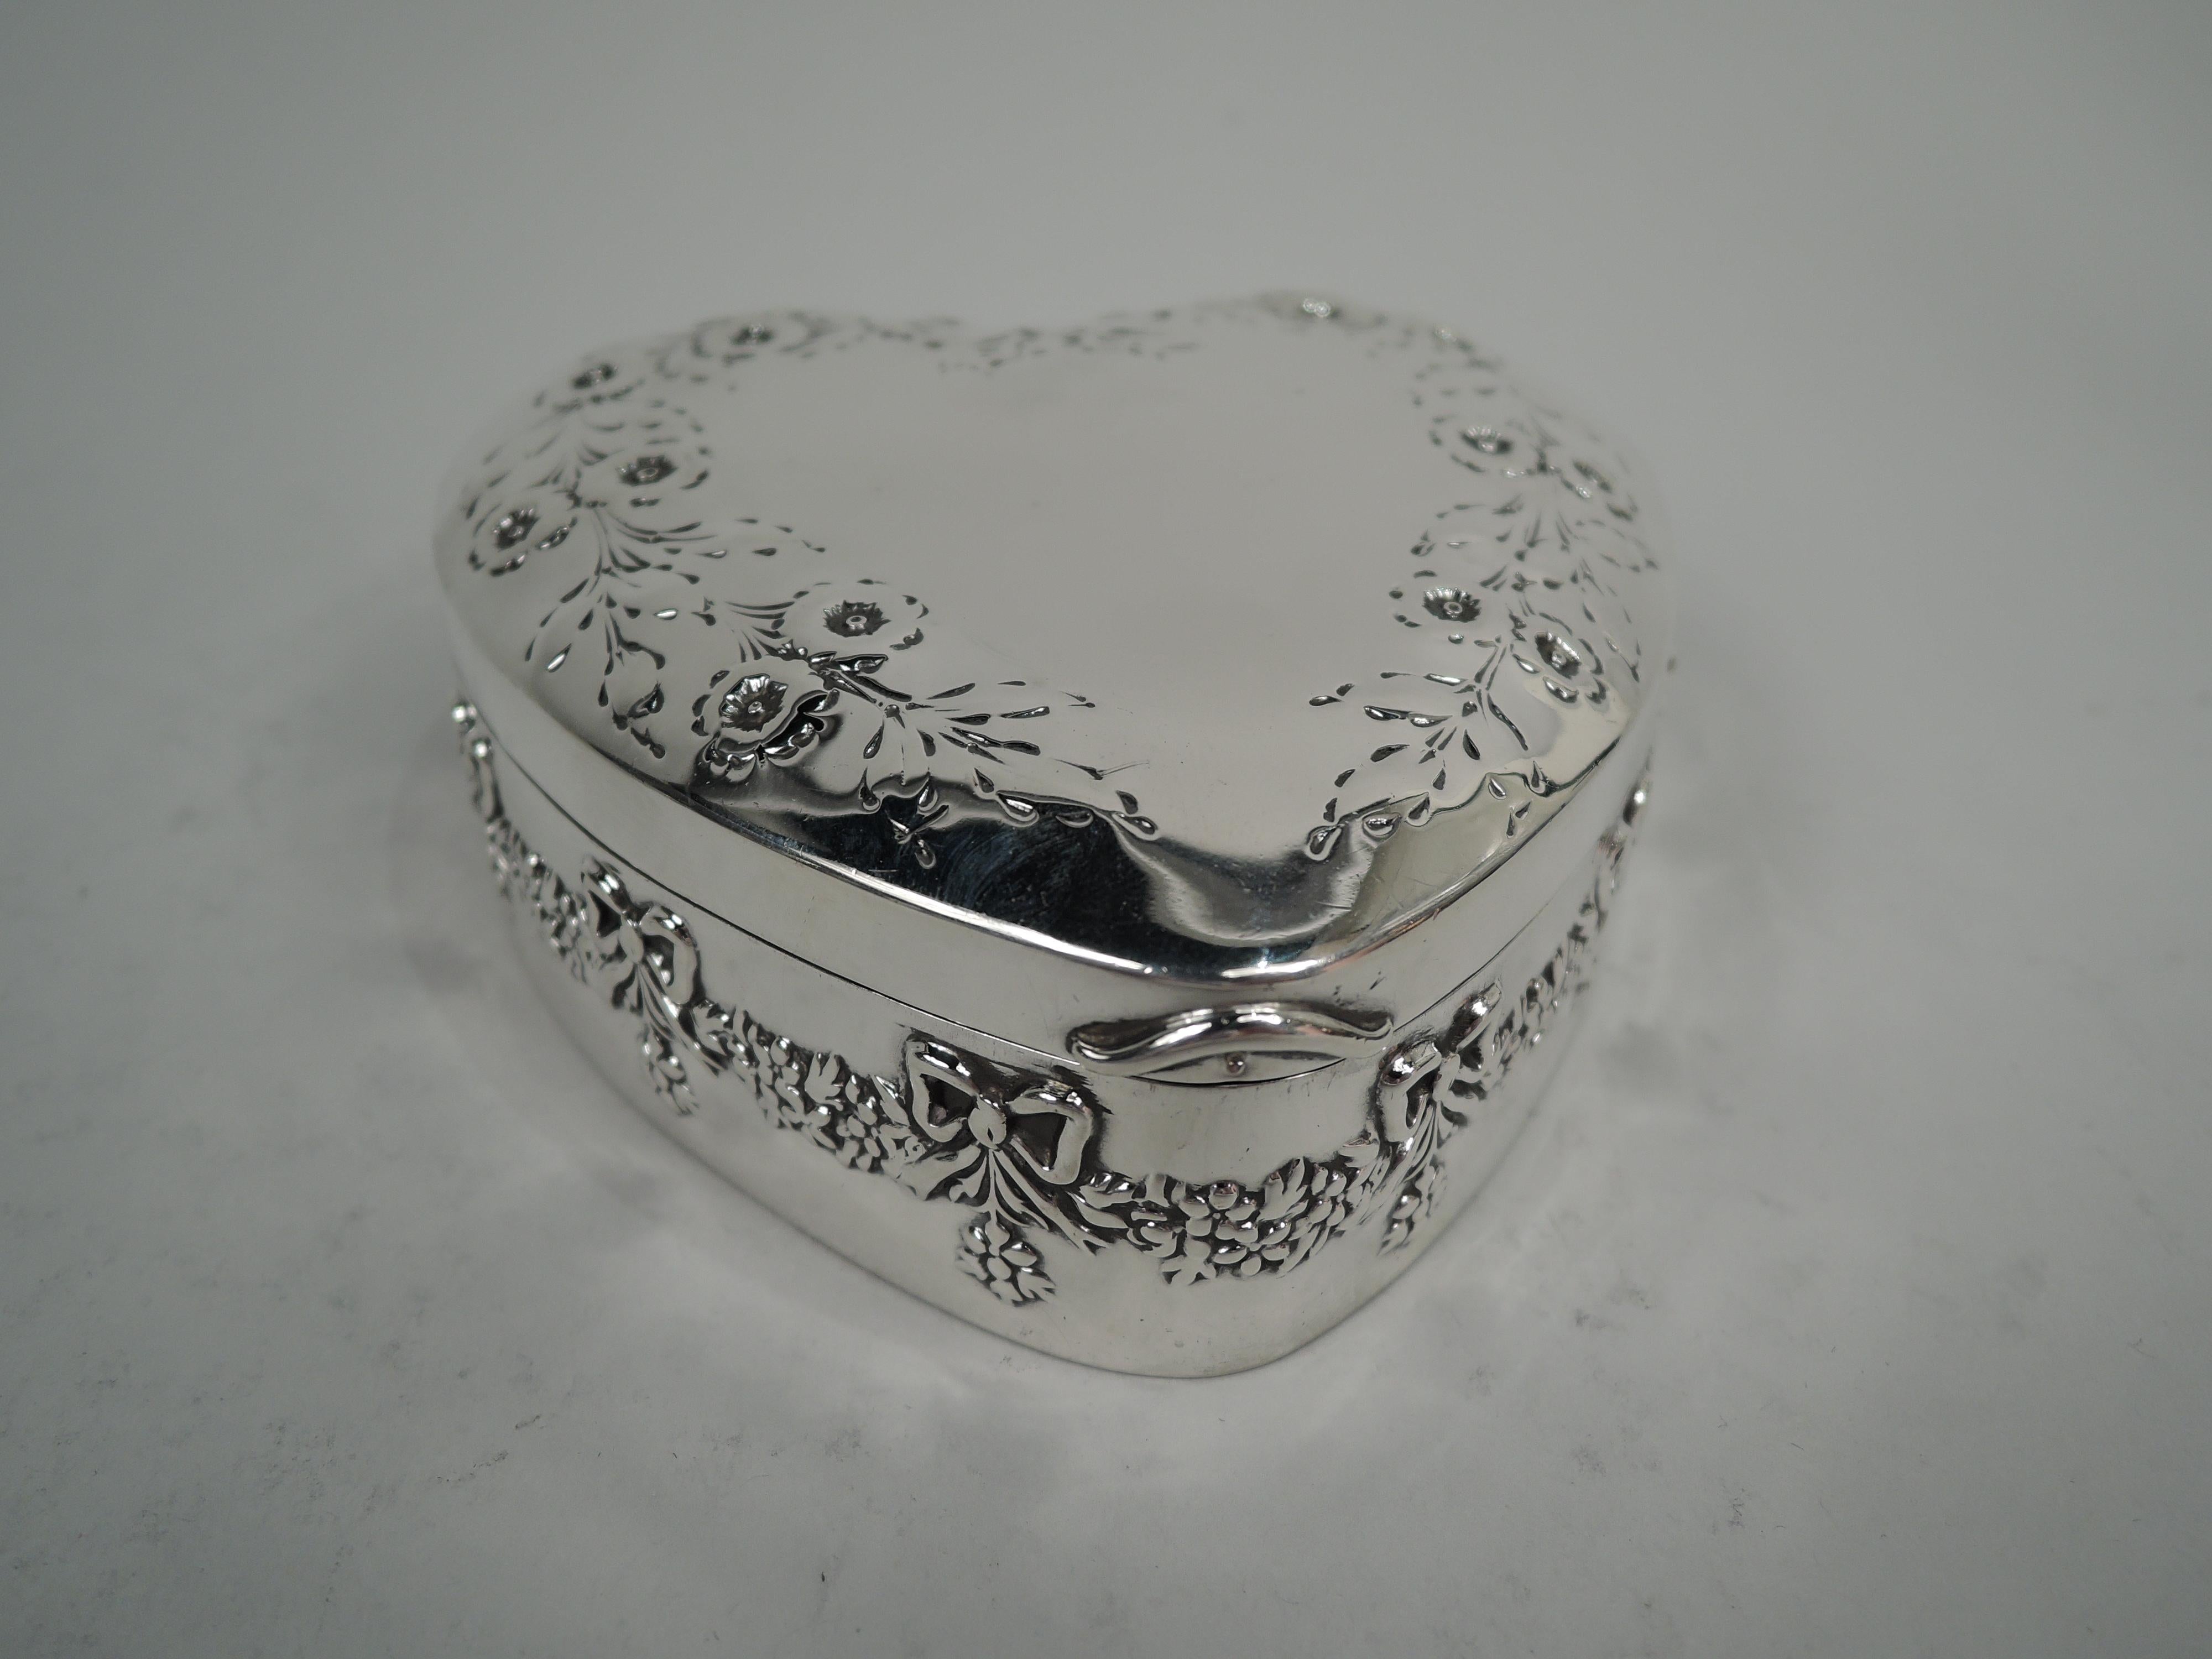 Edwardian Regency sterling silver trinket box. Made by Mauser Mfg. Co. in New York, ca 1910. Heart-shaped. Sides straight with chased garland. Cover hinged and raised with vacant center bordered by flowering branch. Gilt-washed interior. Fully